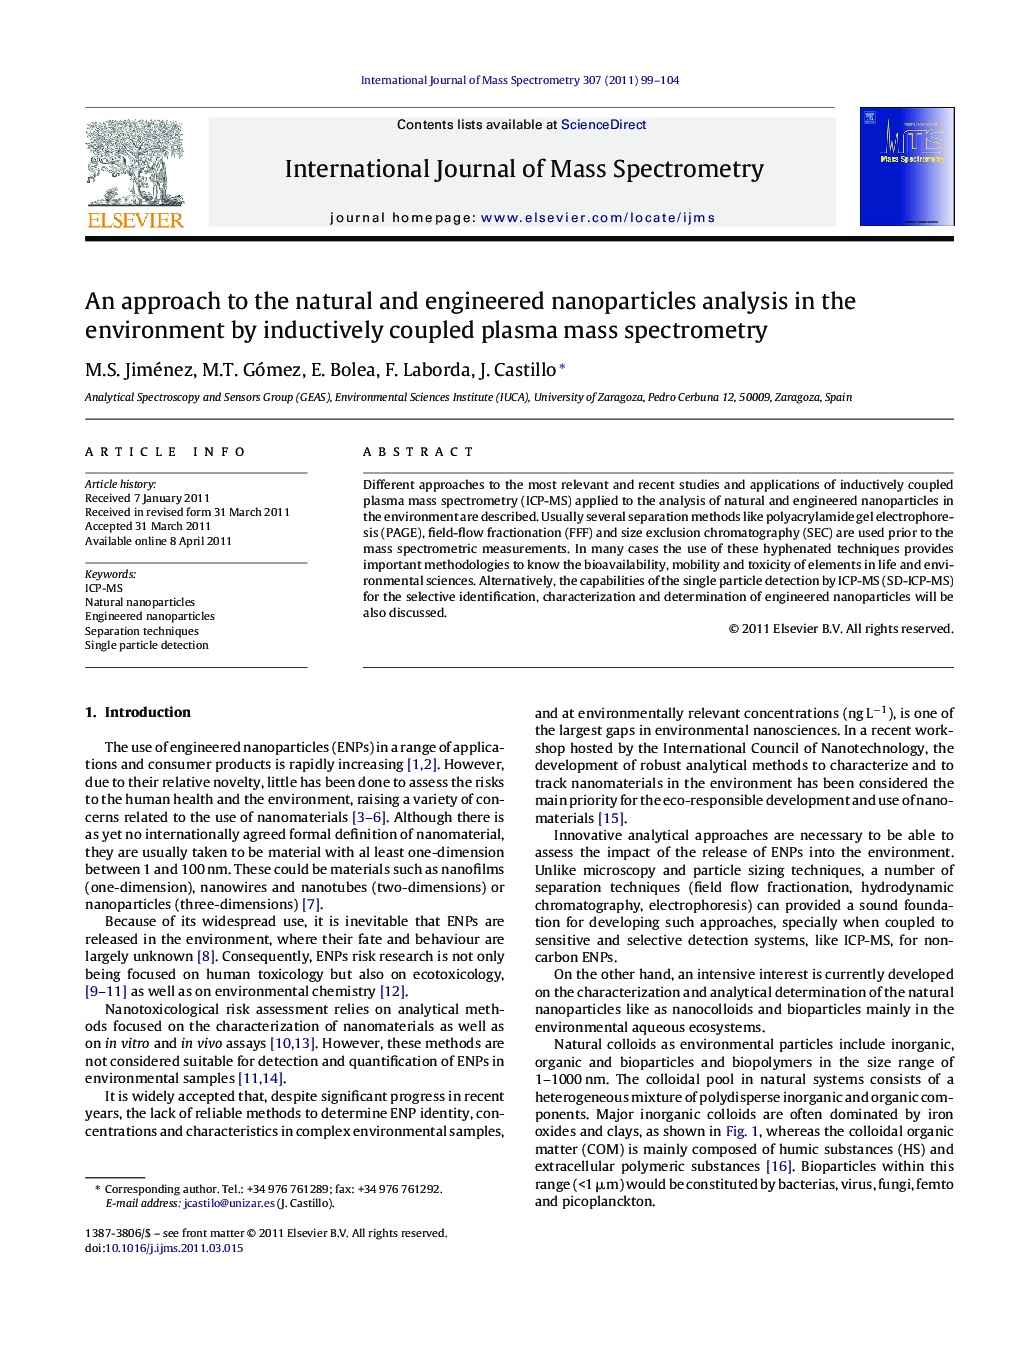 An approach to the natural and engineered nanoparticles analysis in the environment by inductively coupled plasma mass spectrometry